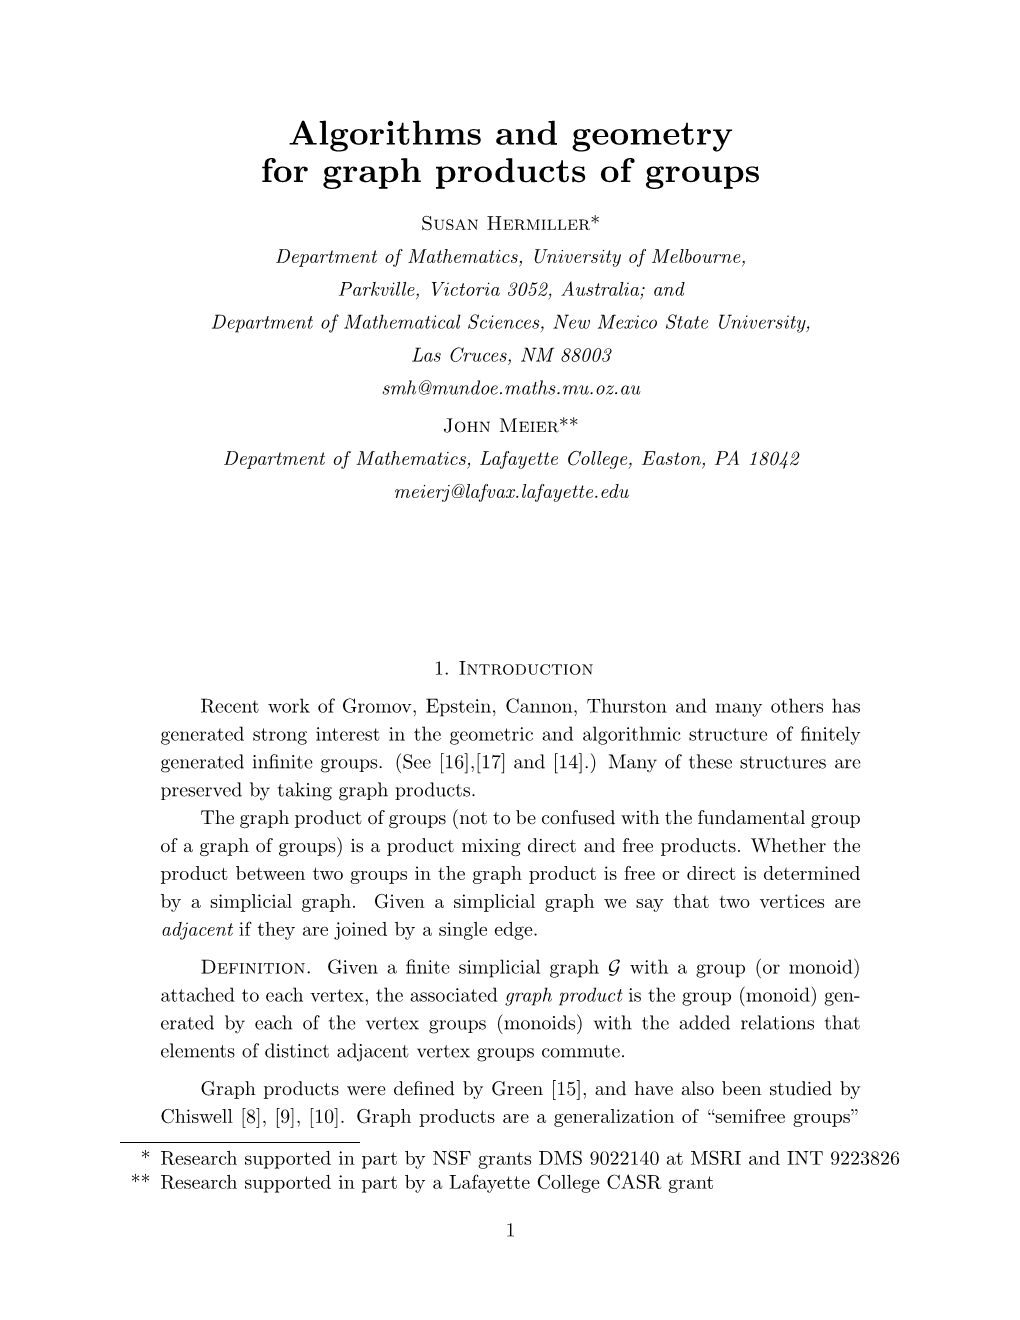 Algorithms and Geometry for Graph Products of Groups